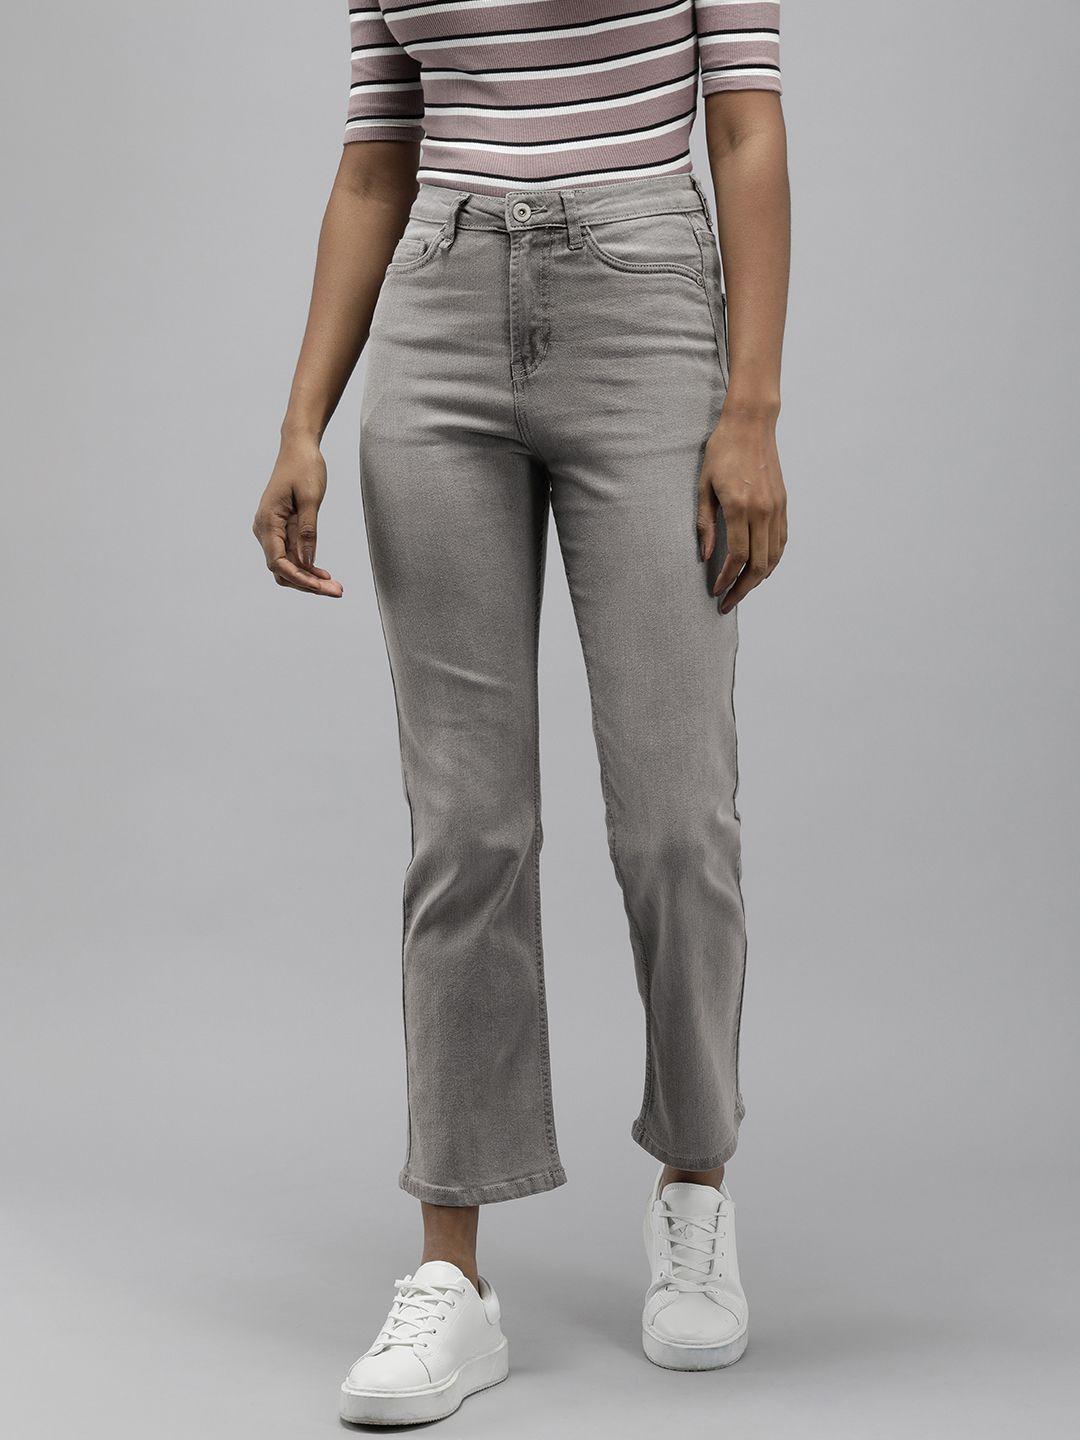 the roadster life co. women straight fit light fade stretchable jeans